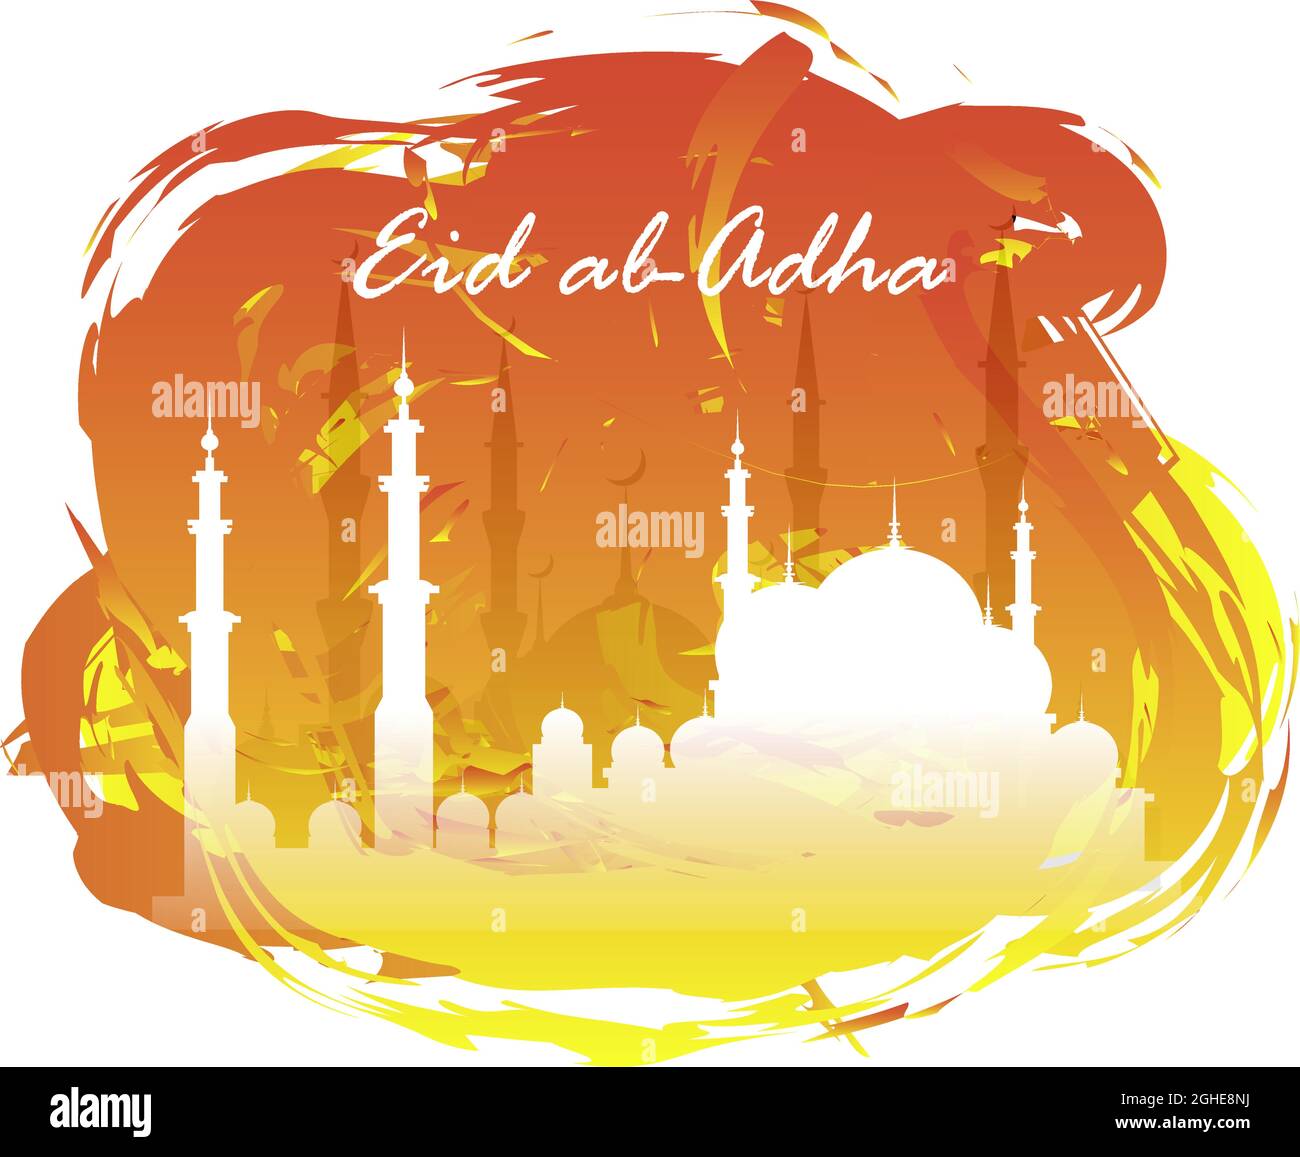 Eid Al Adha. Lettering composition of moslim holy month with mosque building. Stock Vector